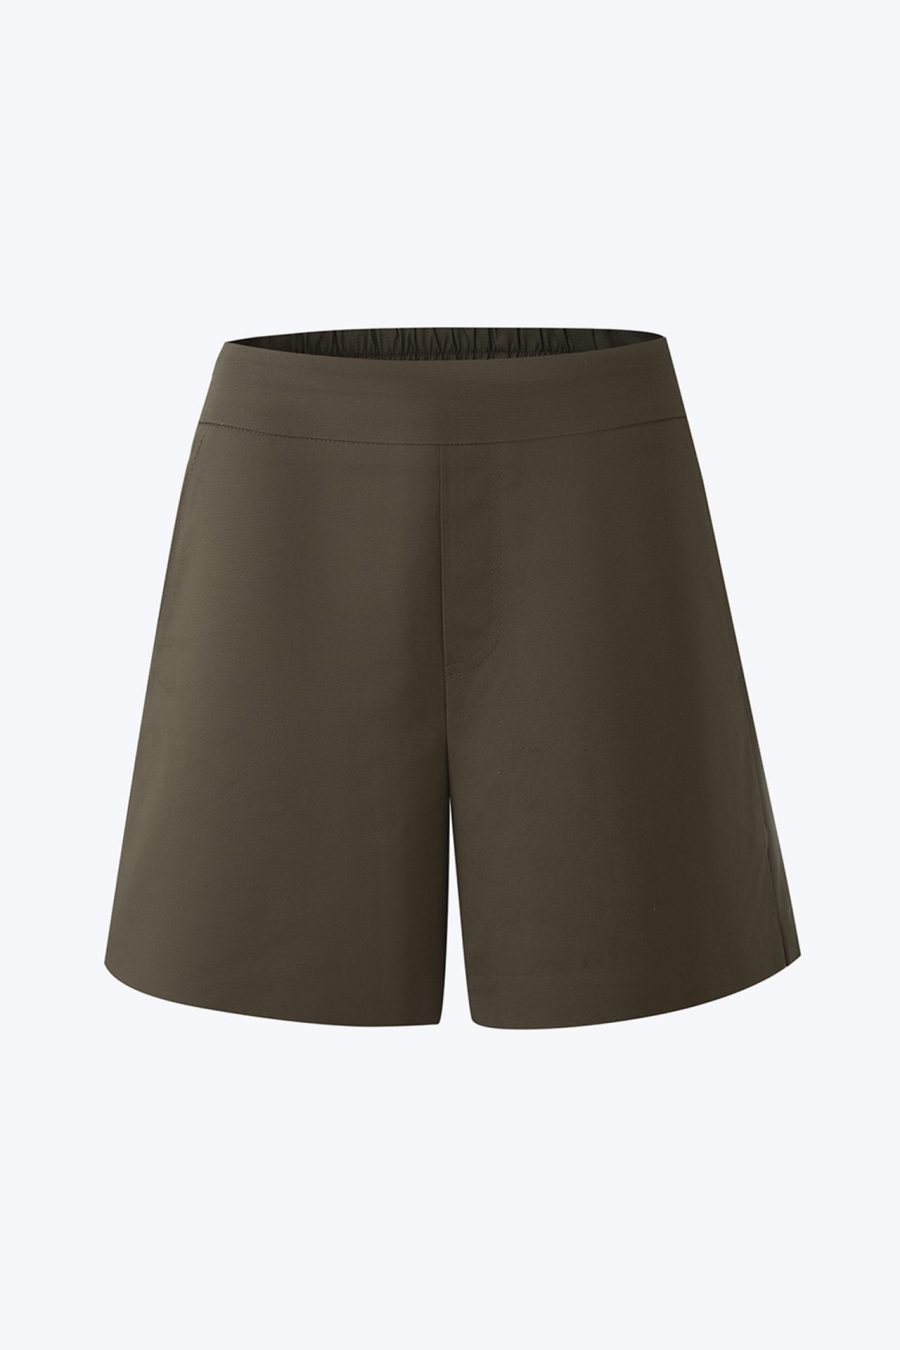 CPS000007A Poly Cotton Shorts ARMY GREEN